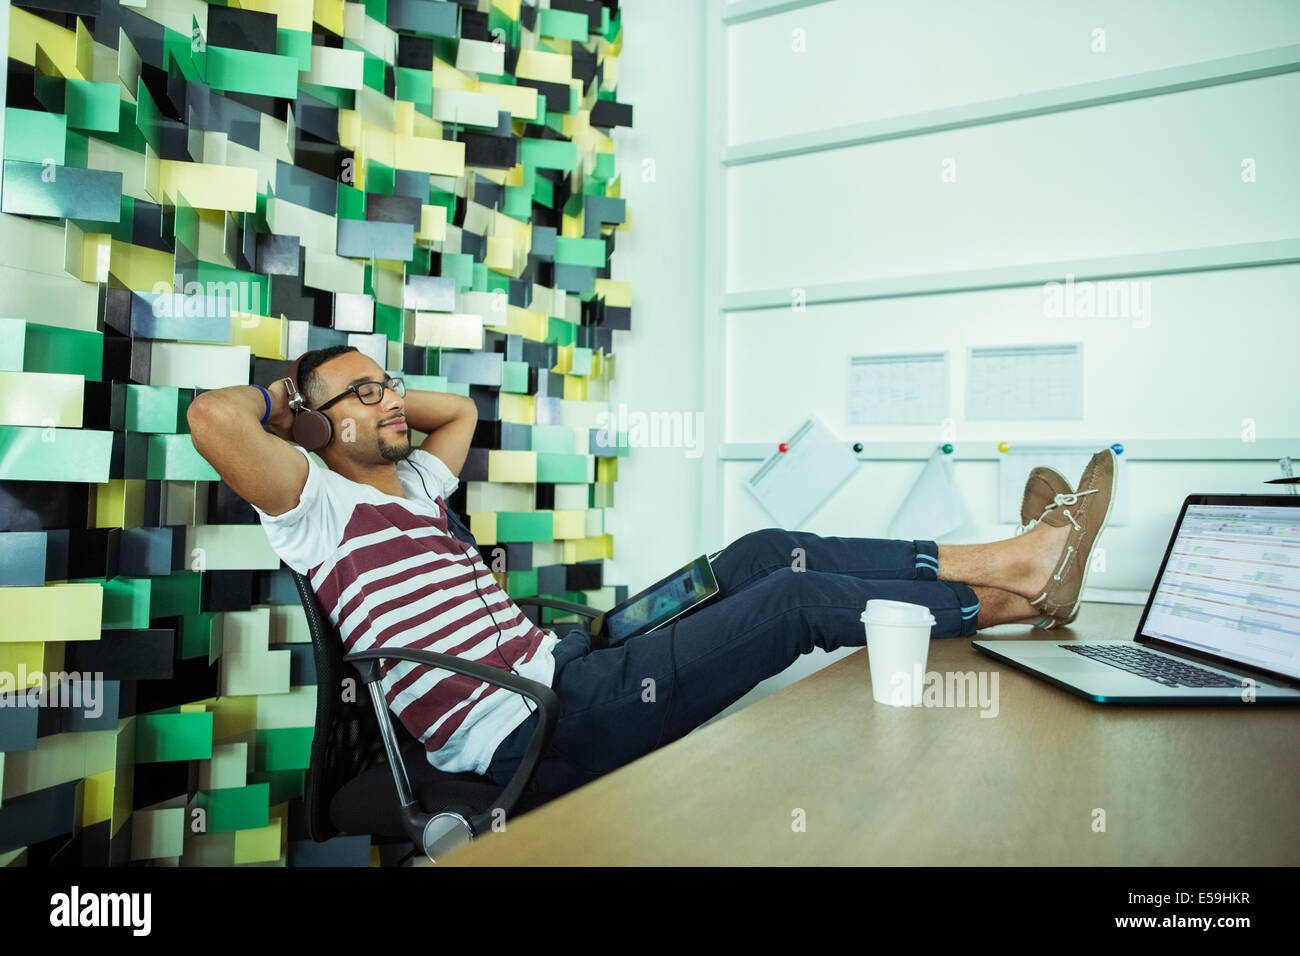 Man relaxing at desk in office Stock Photo